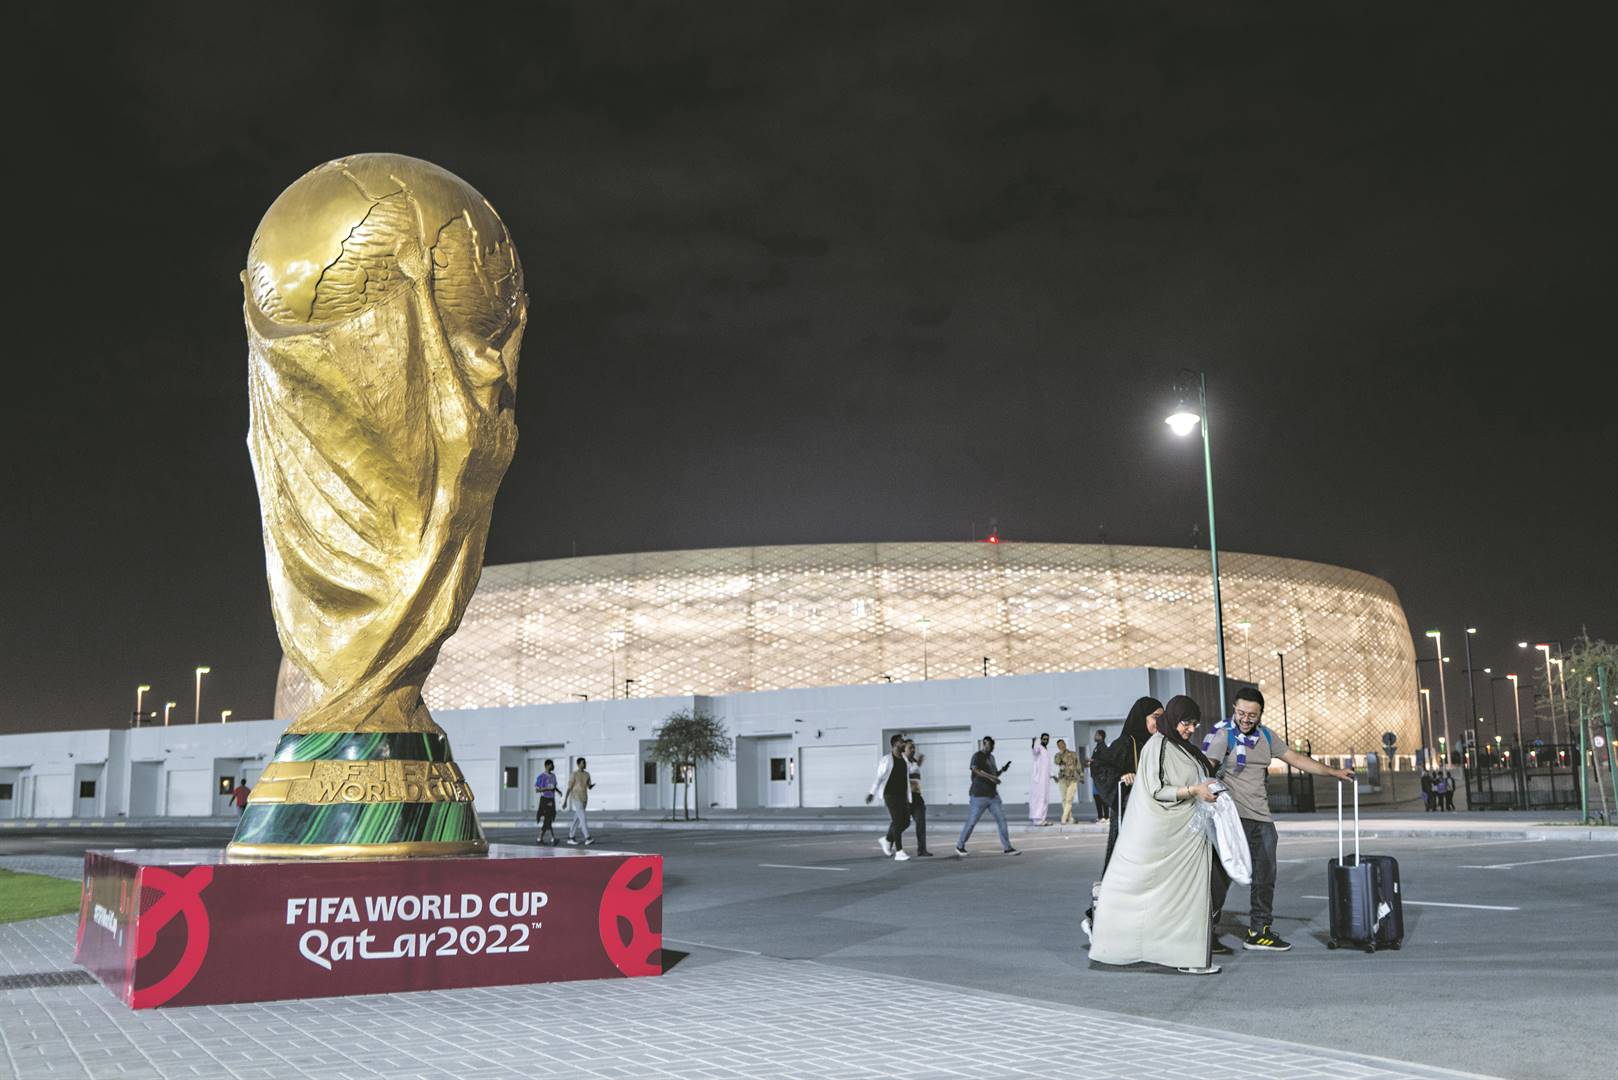 The Fifa World Cup was hosted in Qatar in 2022.